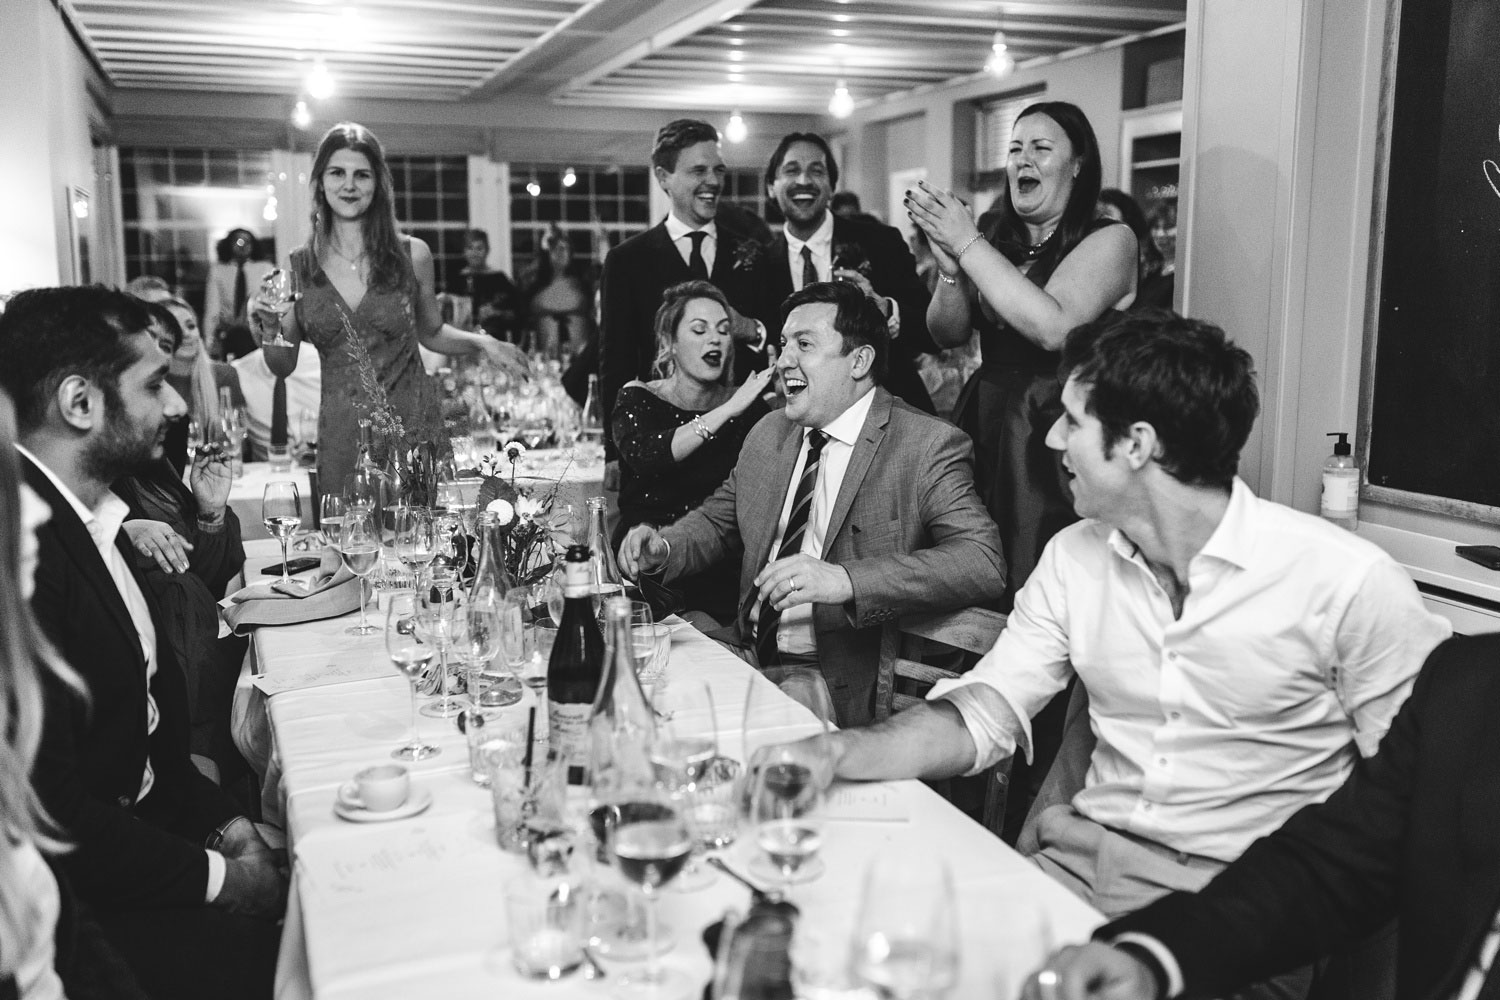 Warm moments as guests share laughter and joy during the heartfelt reception at Helenekilde Badehotel in Tisvildeleje